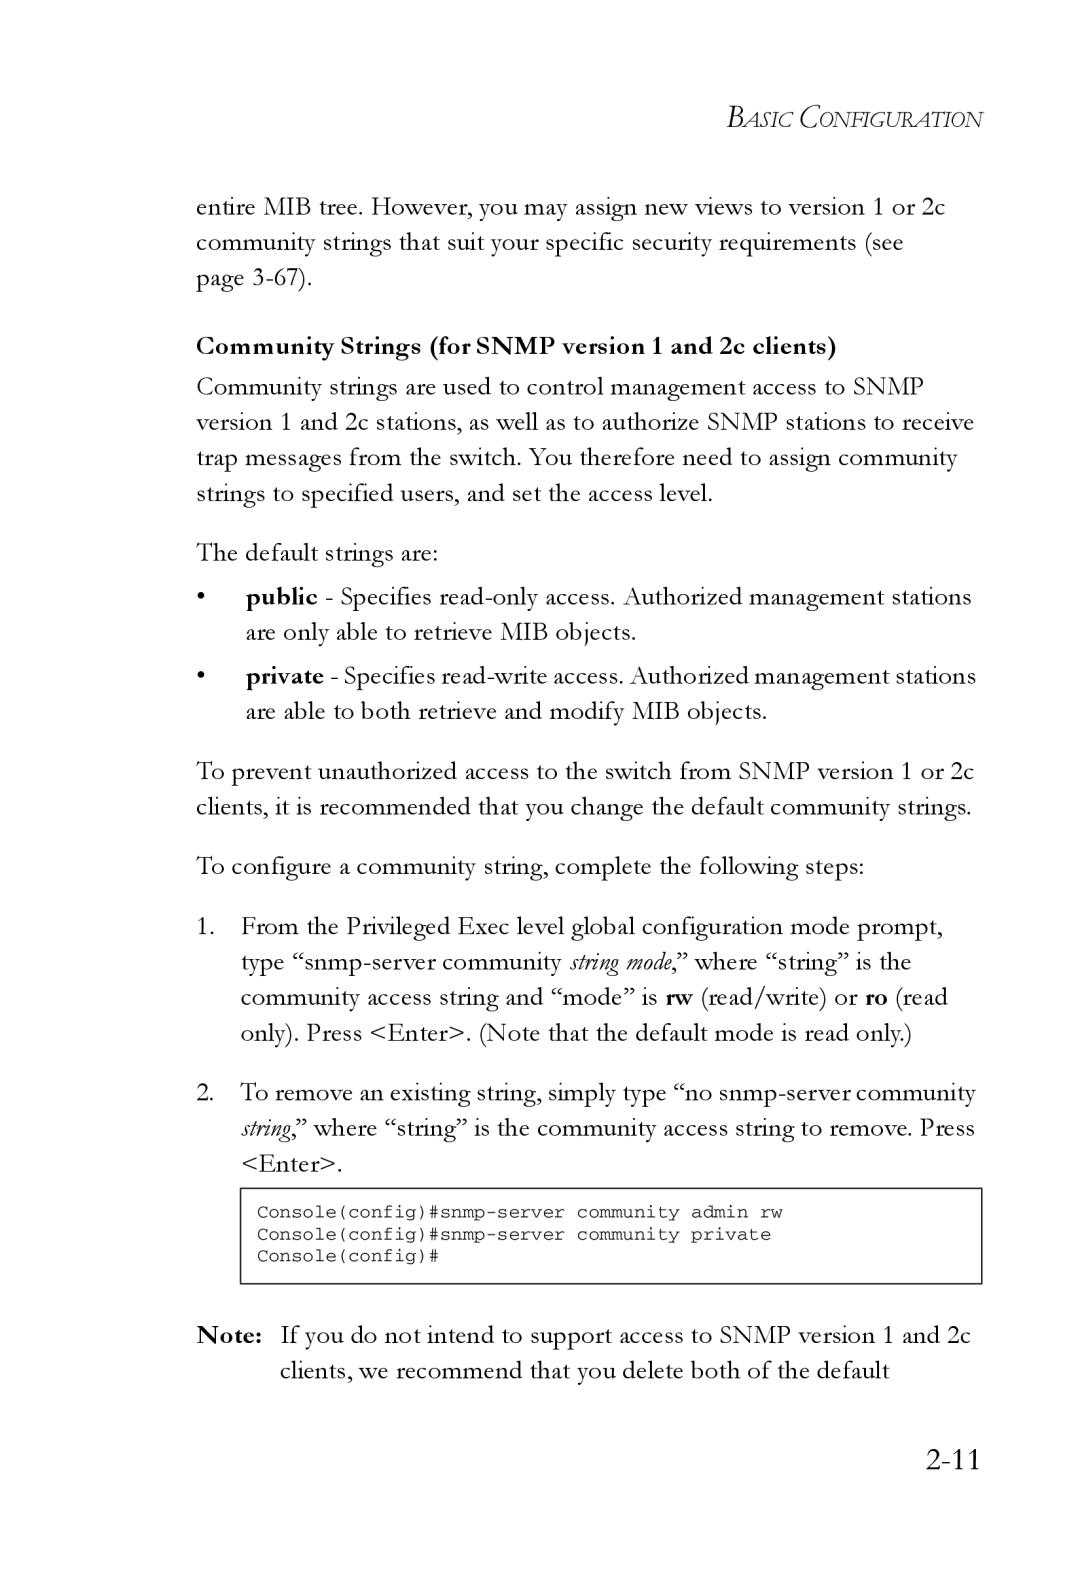 SMC Networks SMC6824M manual Community Strings for Snmp version 1 and 2c clients 